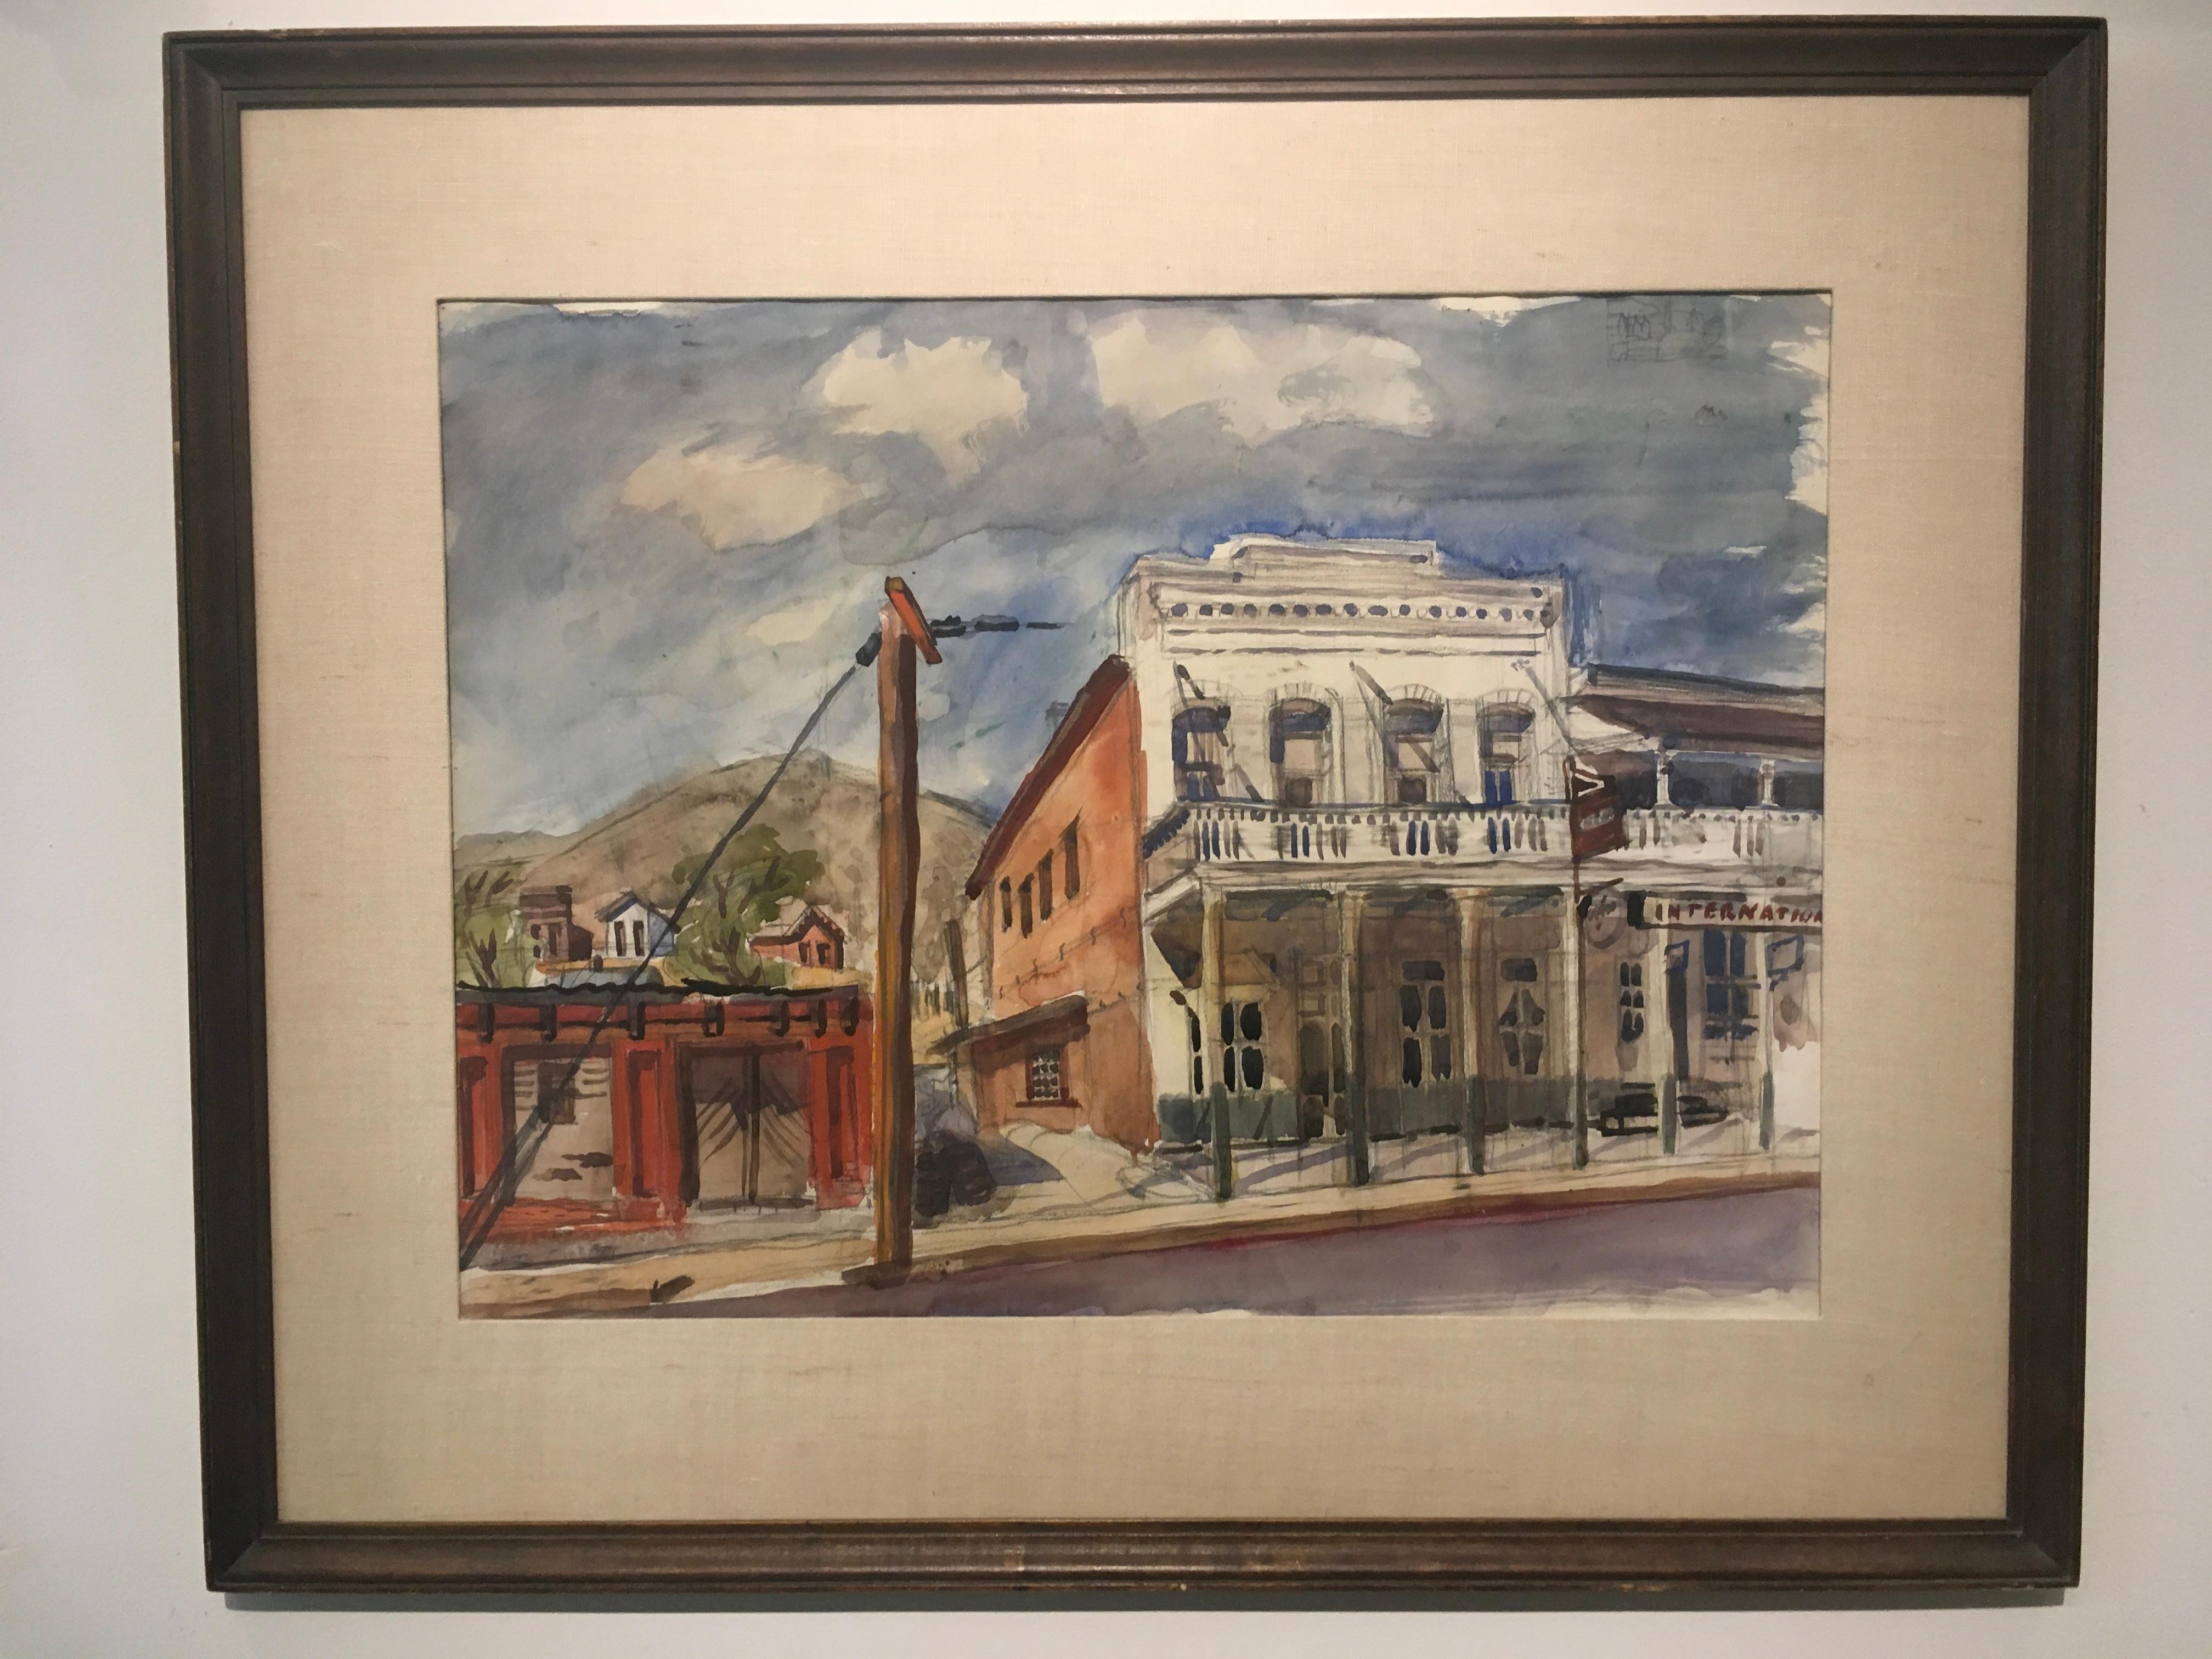 'Historic Downtown,' by Palgrave Holmes Coates, Watercolor on Paper Painting